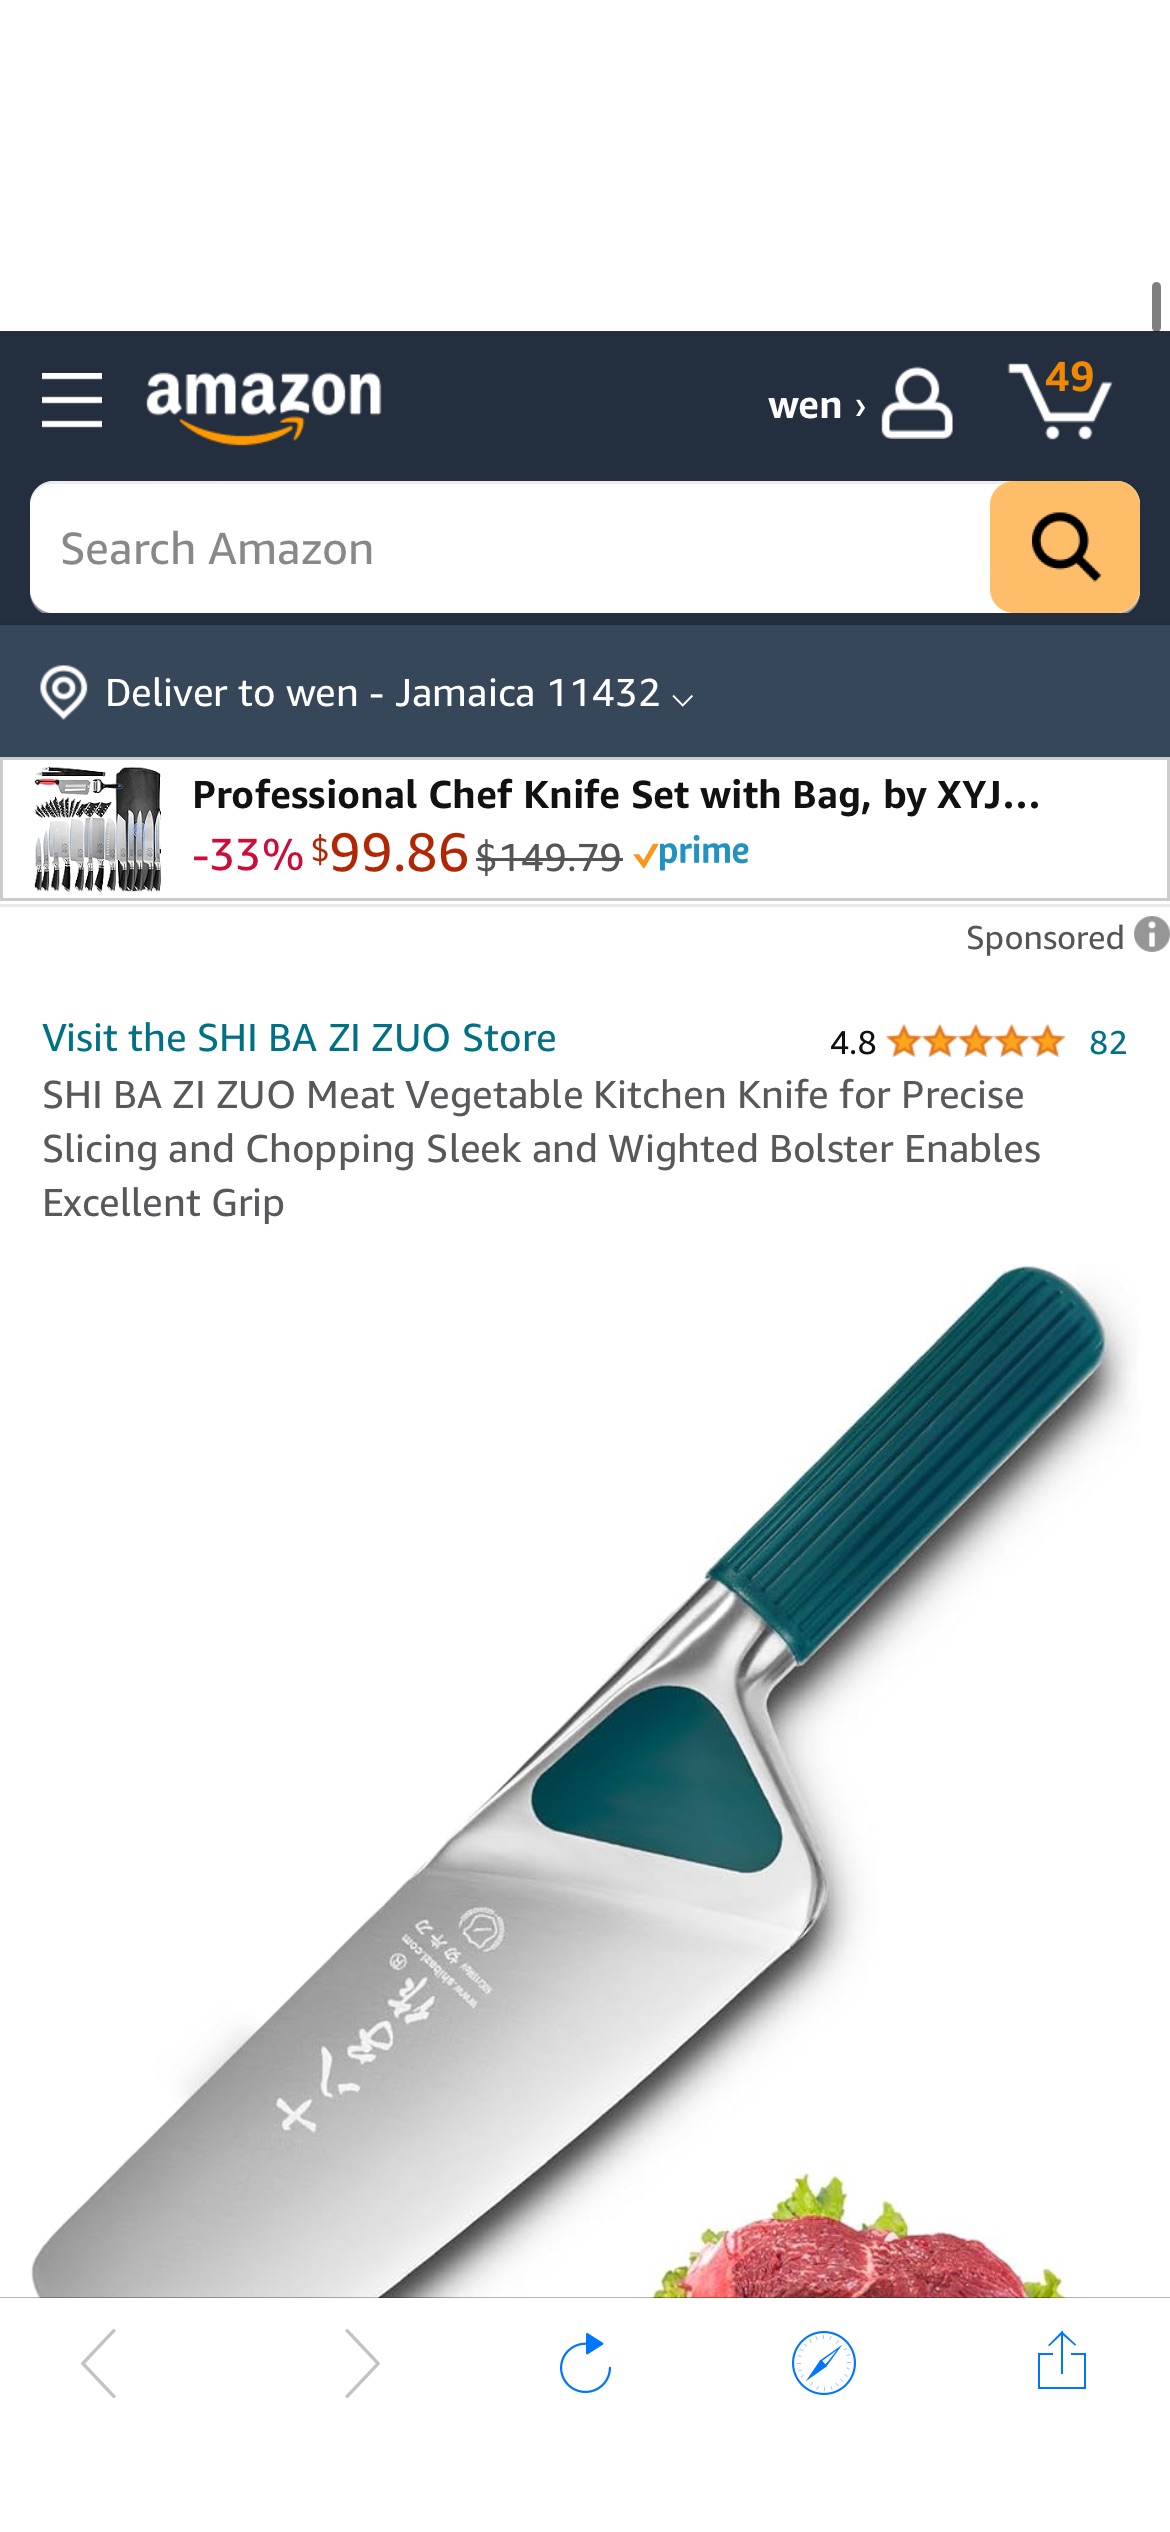 Amazon.com: SHI BA ZI ZUO Meat Vegetable Kitchen Knife for Precise Slicing and Chopping Sleek and Wighted Bolster Enables Excellent Grip : Home & Kitchen